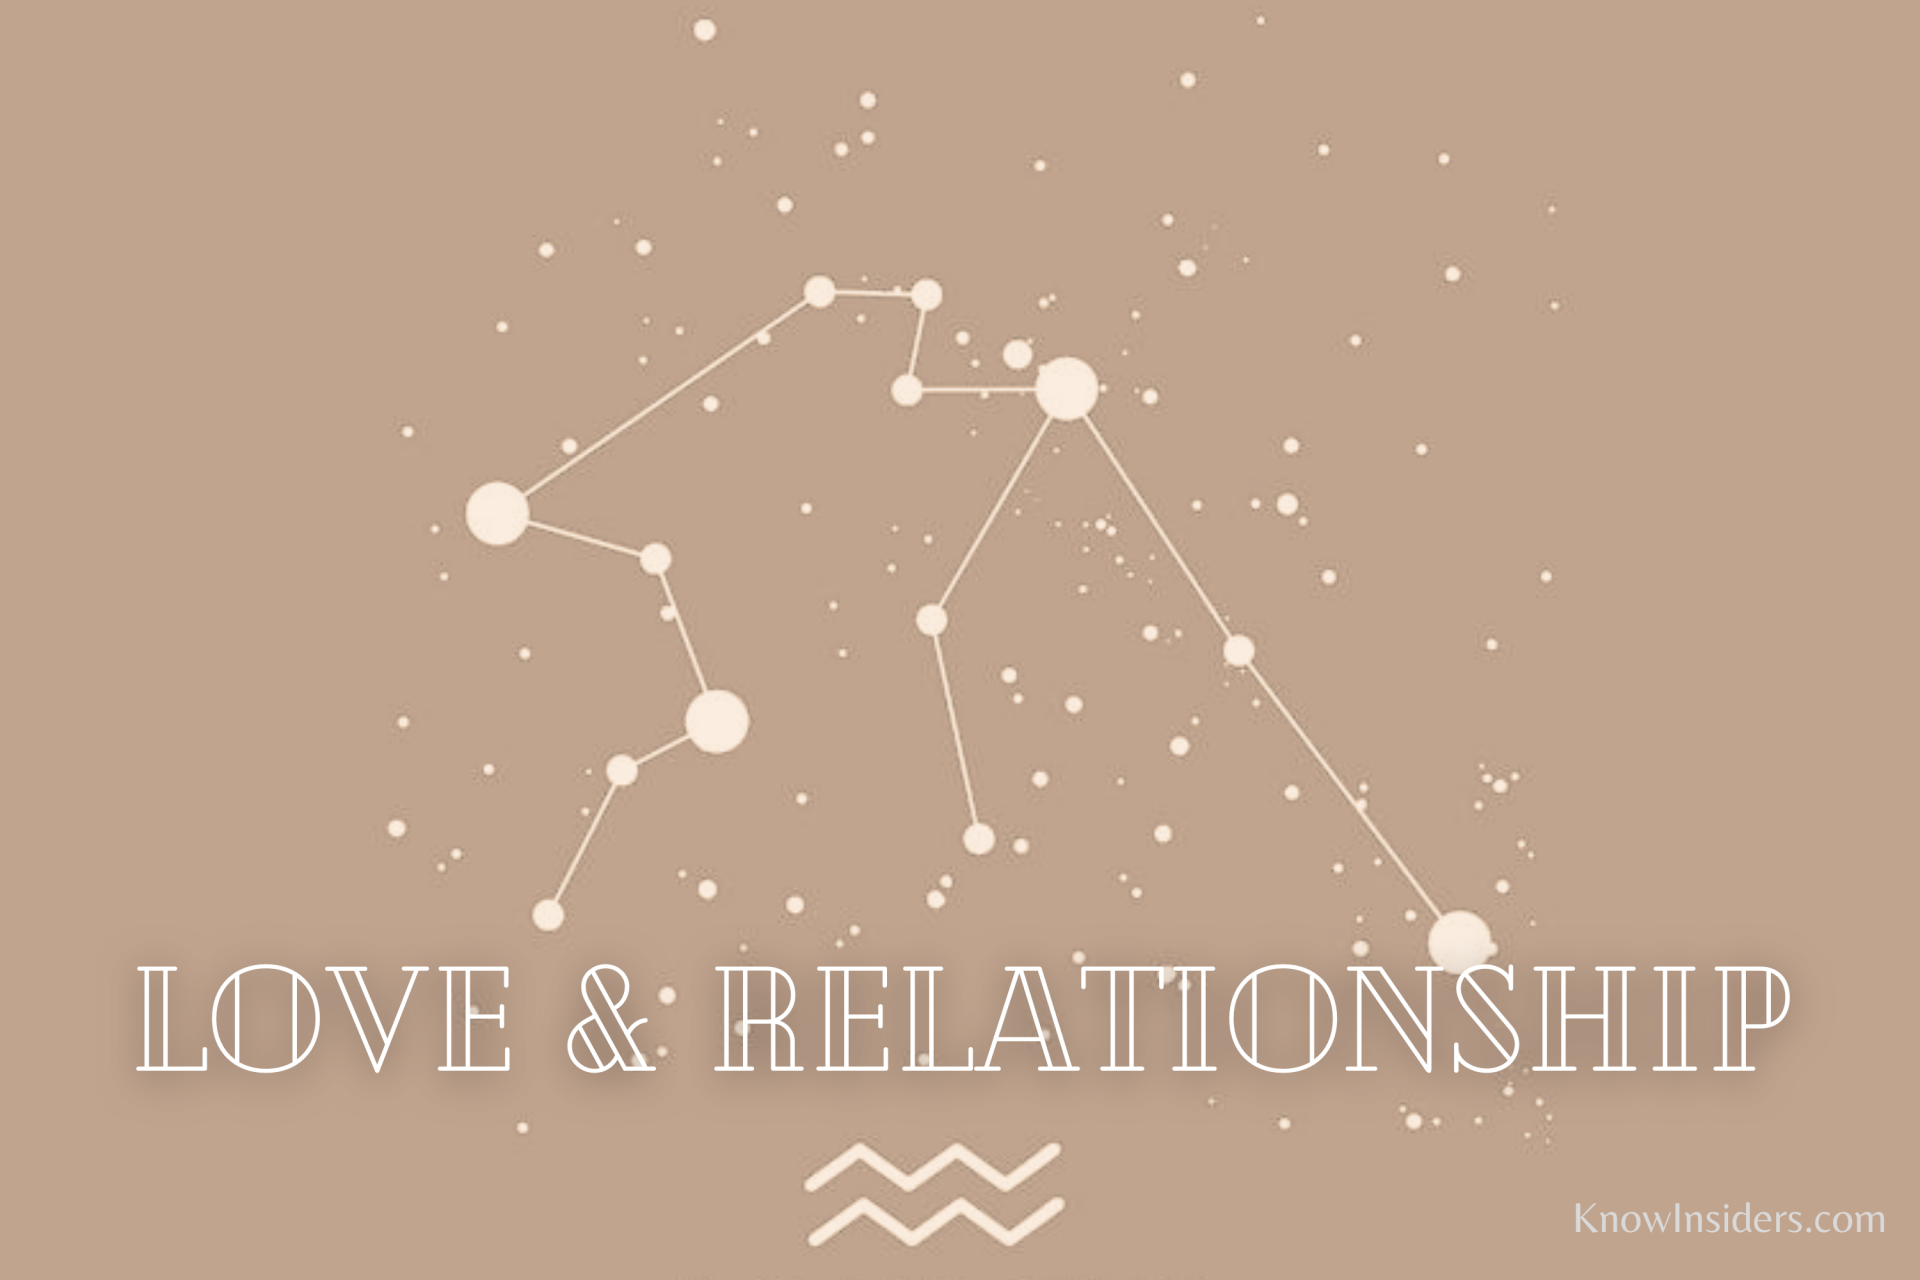 AQUARIUS Horoscope: Astrological Prediction for Love, Family and Relationship